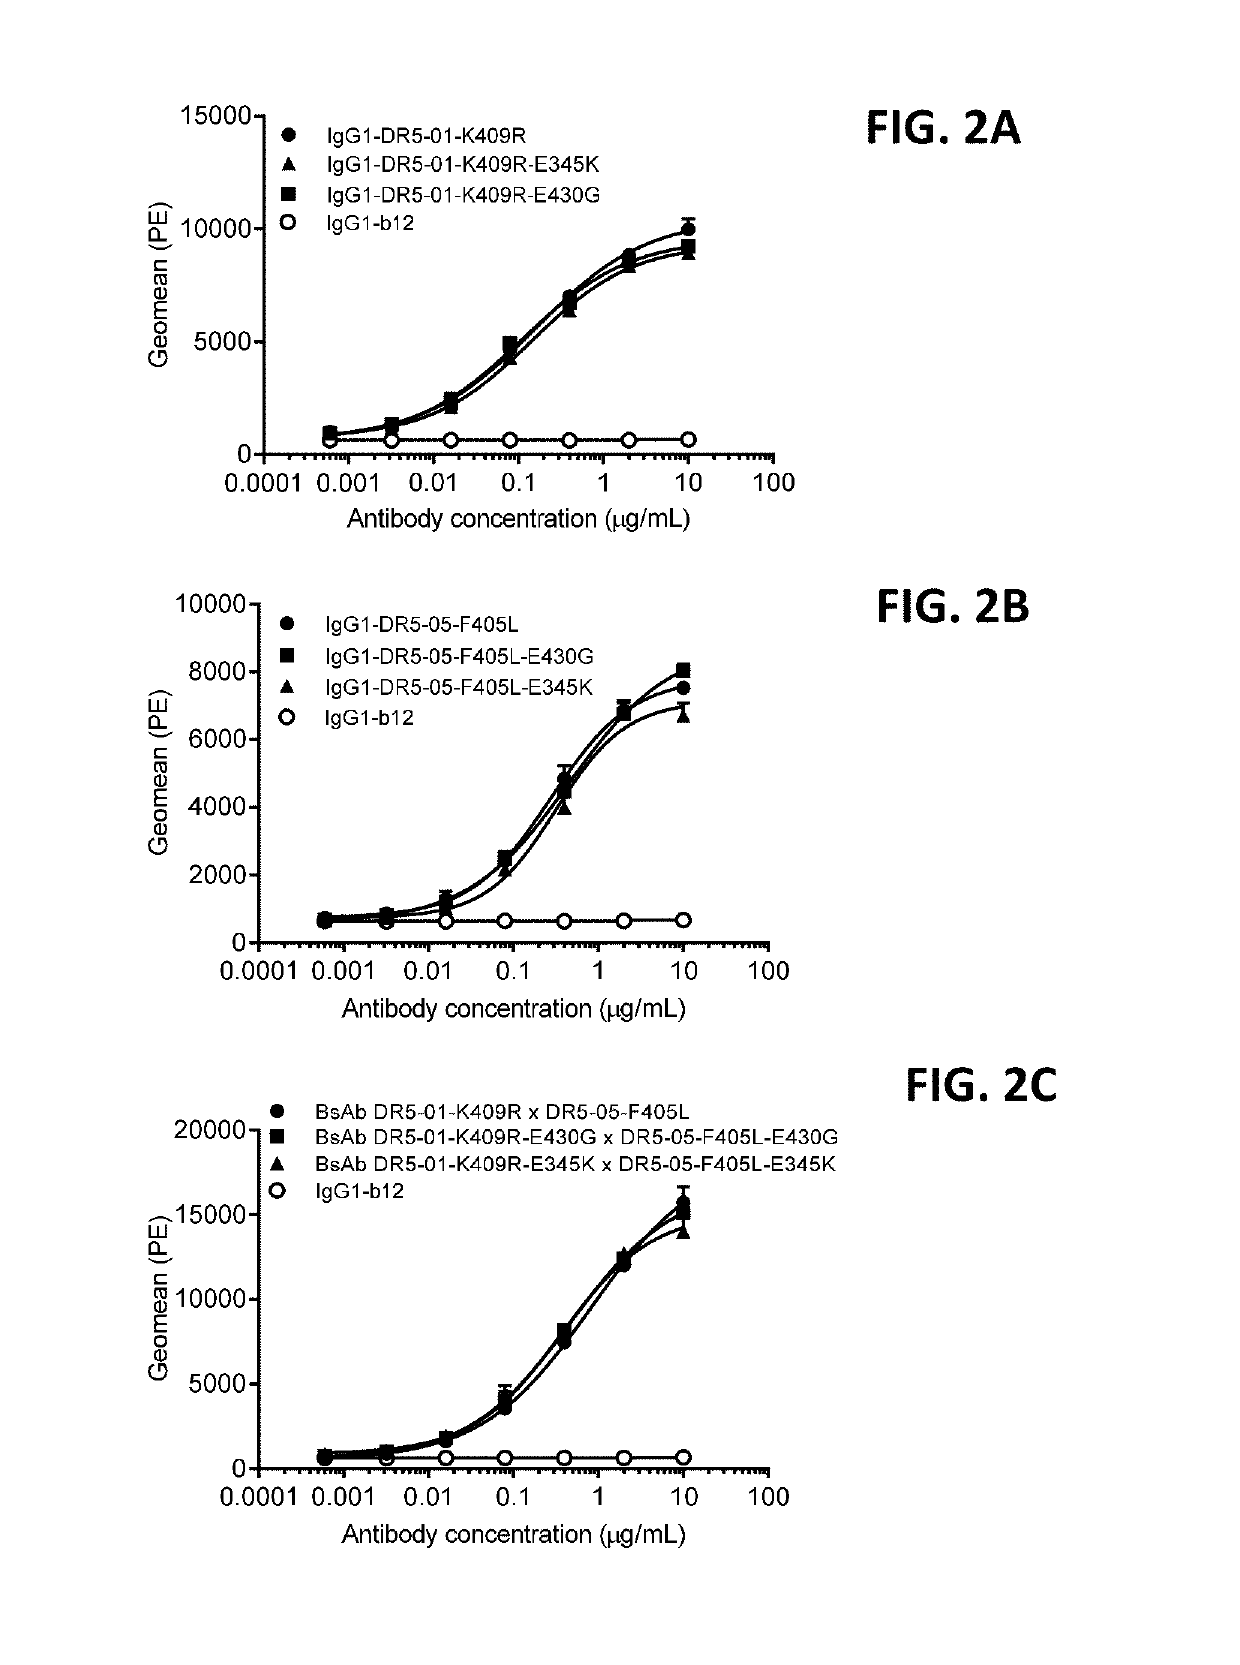 Anti-death receptor antibodies and methods of use thereof